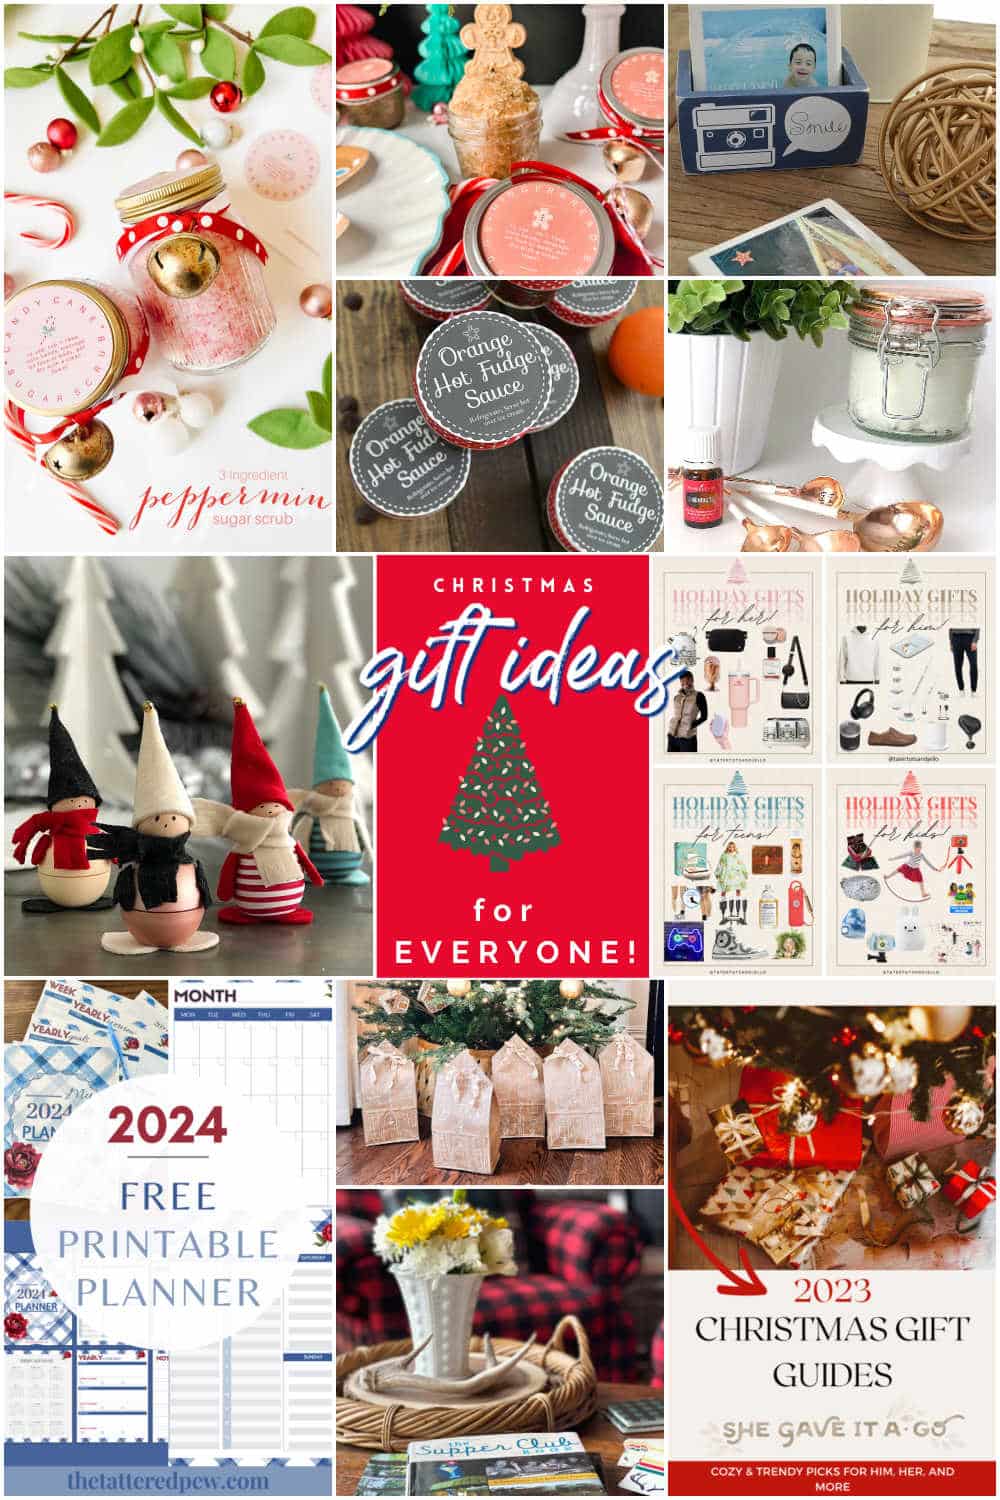 Christmas Gift Ideas for Everyone! Embark on a festive journey with gift ideas for everyone on your list, from personalized treasures to creative DIY delights.